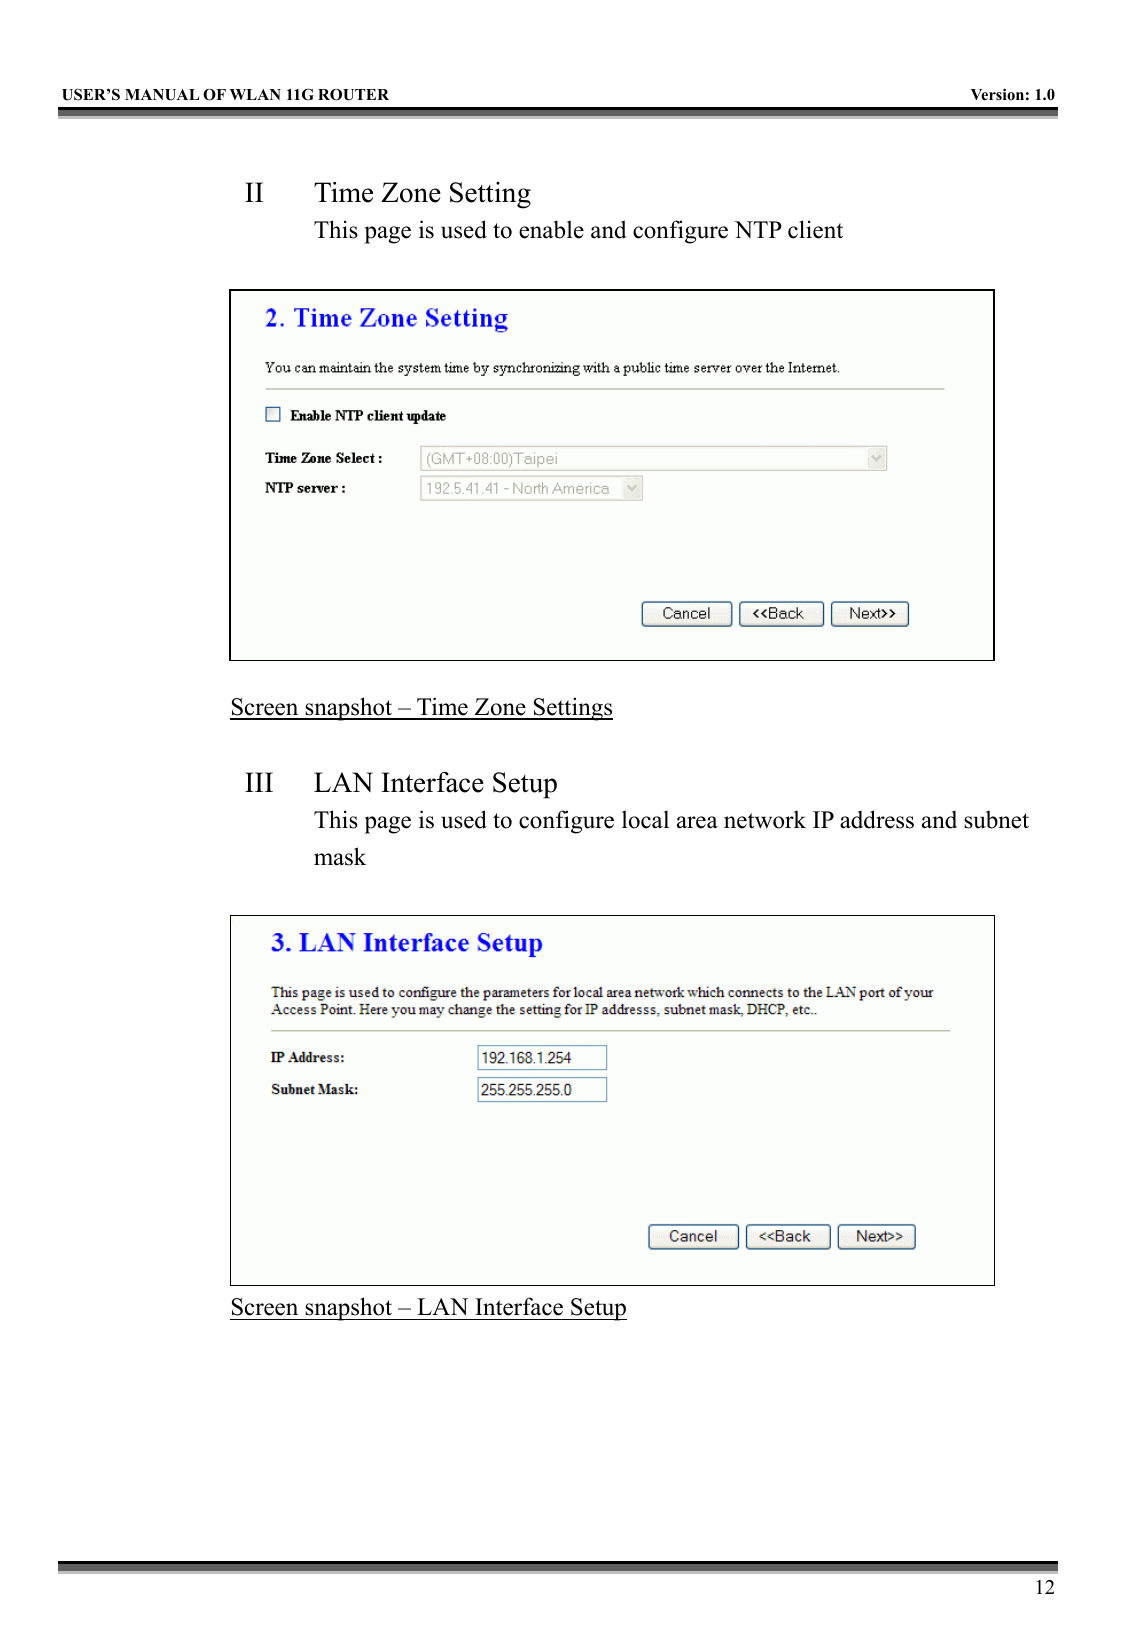   USER’S MANUAL OF WLAN 11G ROUTER    Version: 1.0     12  II  Time Zone Setting This page is used to enable and configure NTP client   Screen snapshot – Time Zone Settings  III  LAN Interface Setup This page is used to configure local area network IP address and subnet mask   Screen snapshot – LAN Interface Setup  